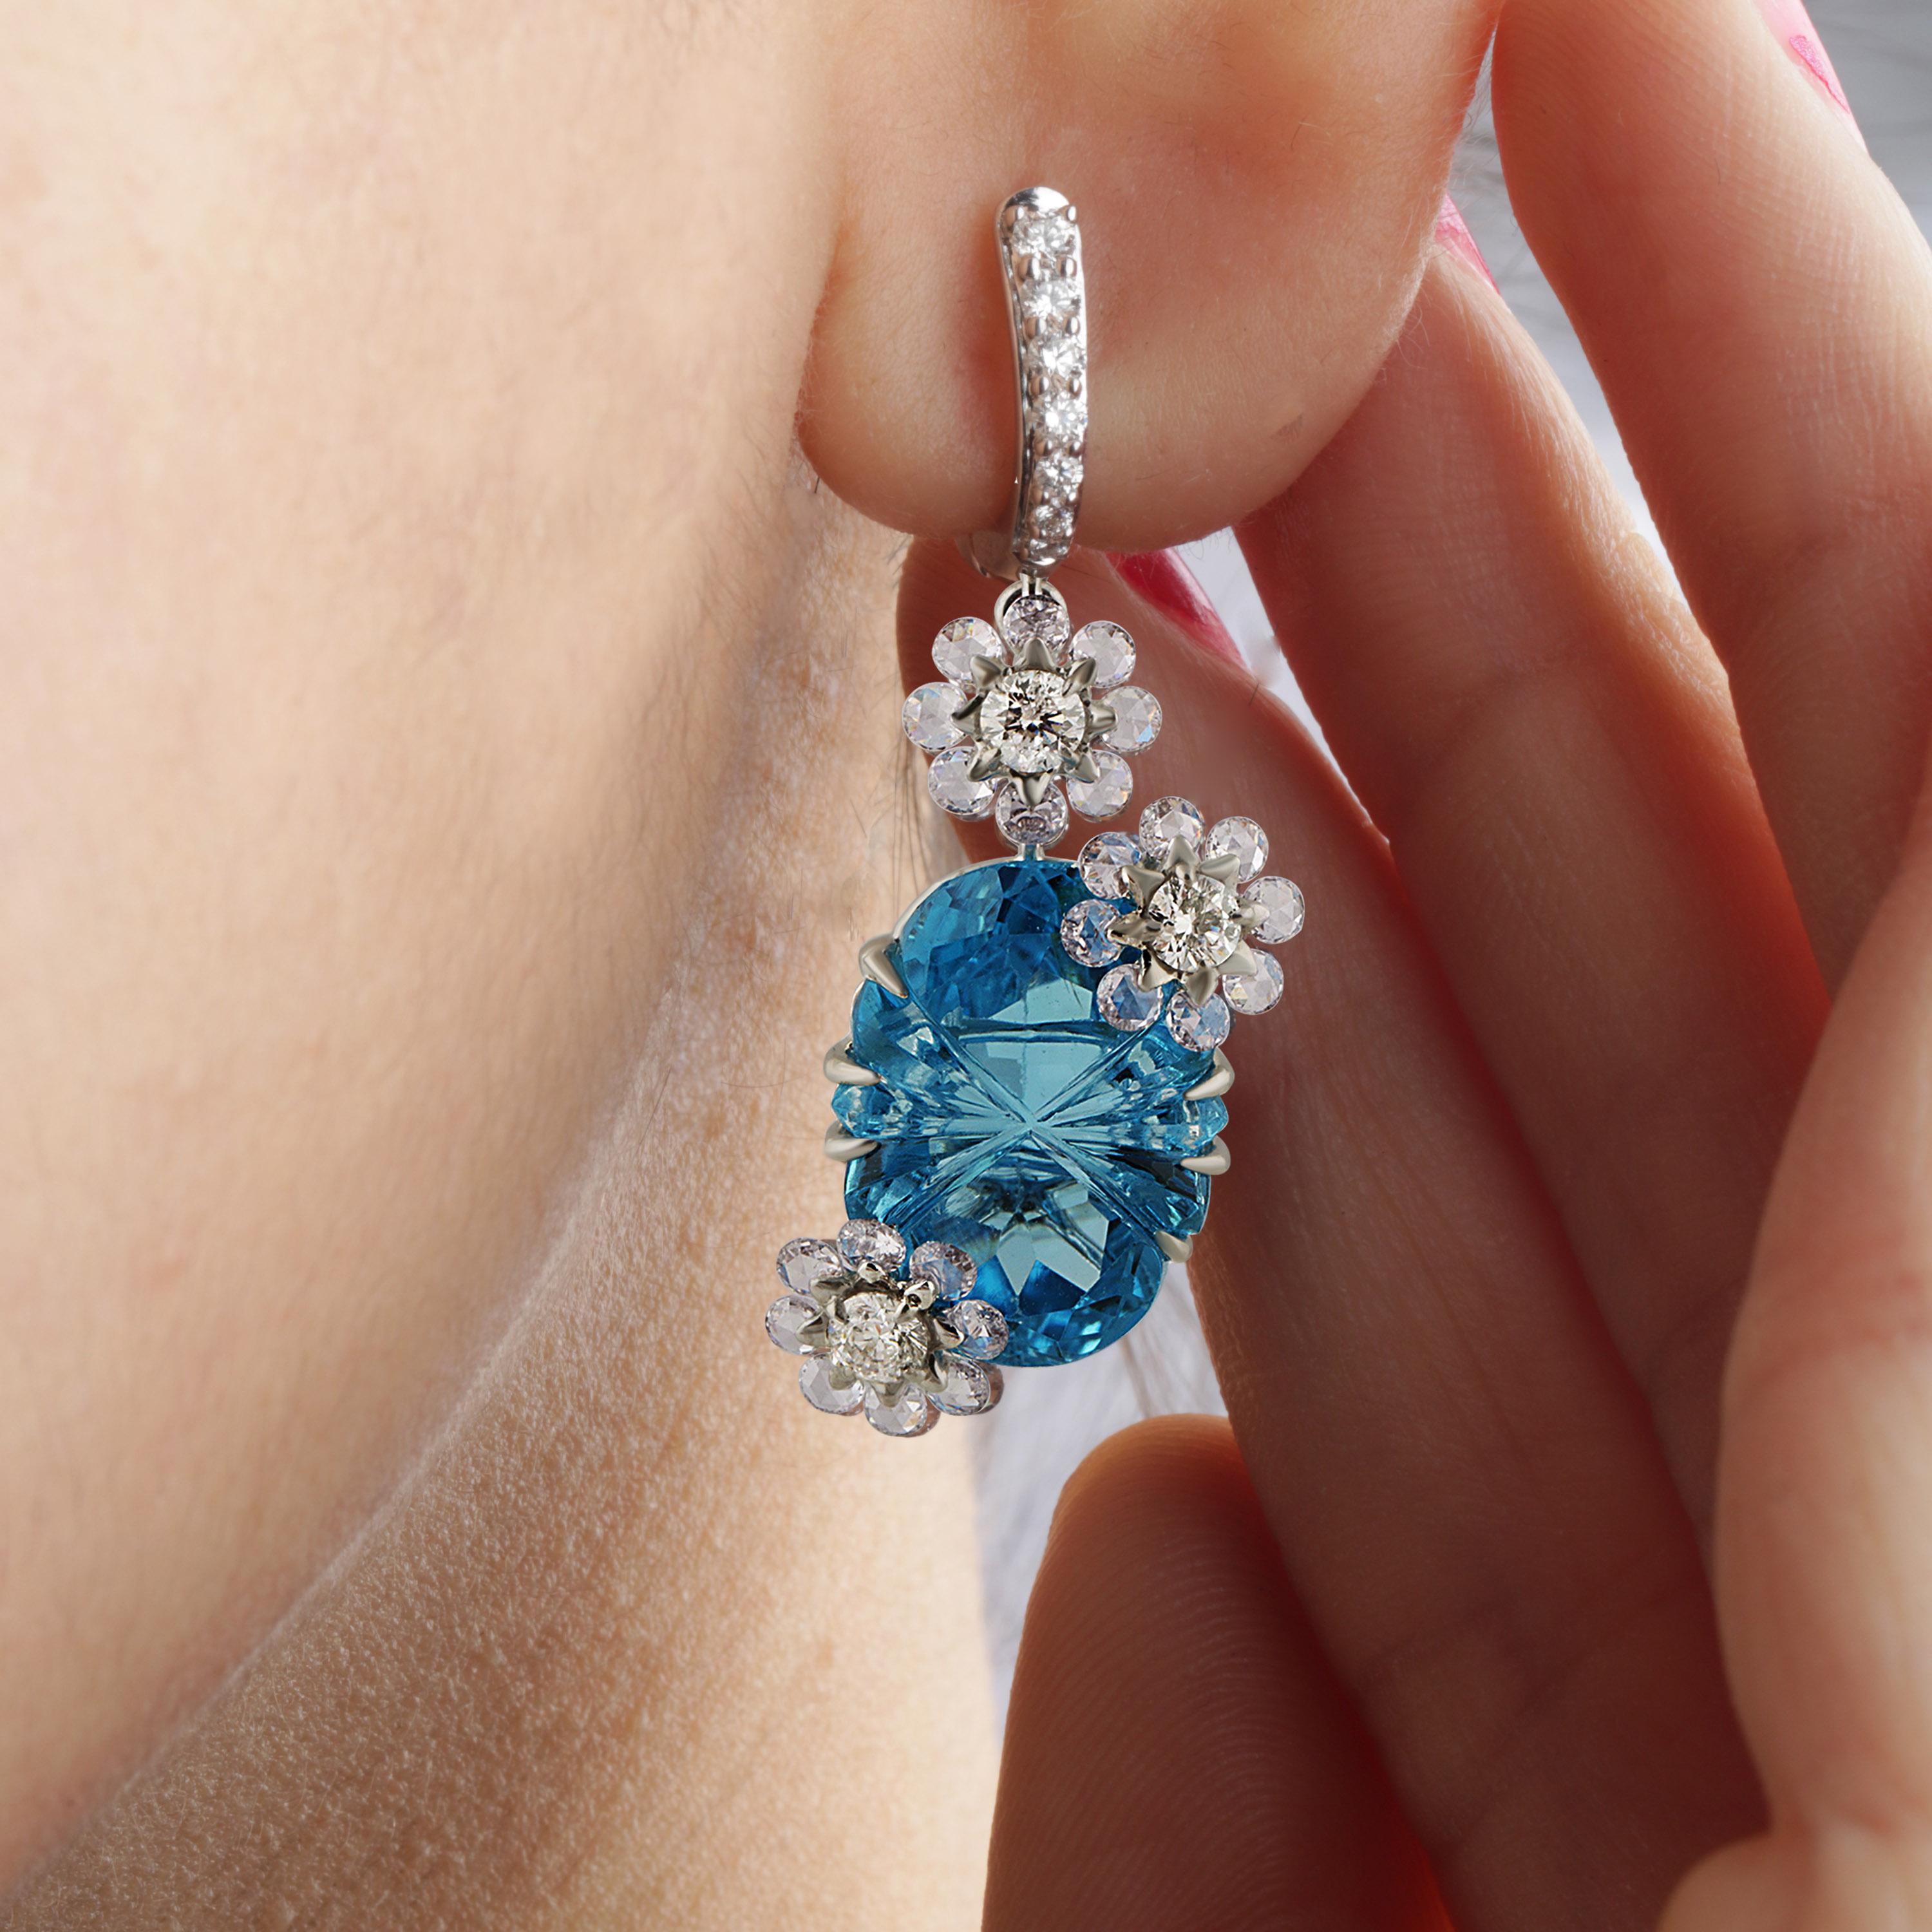 Gross Weight: 11.21 Grams
Diamond Weight: 2.03 cts
Blue Topaz Weight: 22.77 cts
IGI Certification can be done on request

Video of the product can be shared upon request.

This pair of 18K white gold earrings adorned with round cut diamonds, round